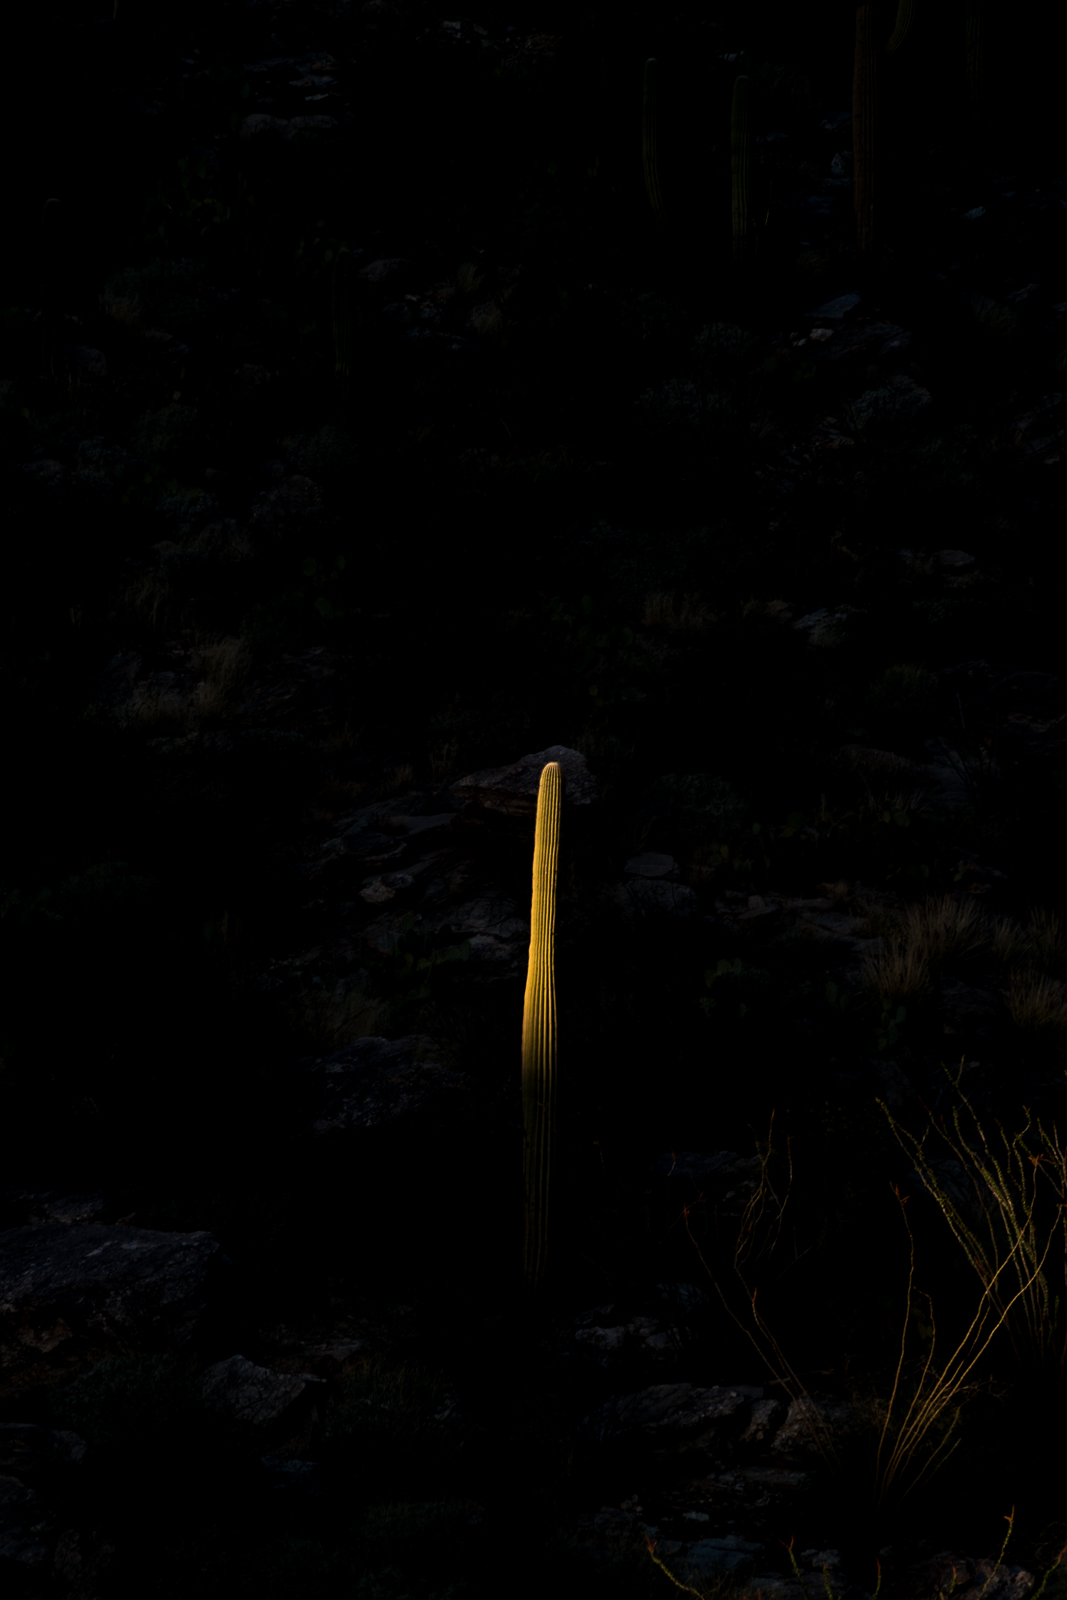 A Saguaro floating above the shadows on the slopes of Pontatoc Canyon. February 2016.